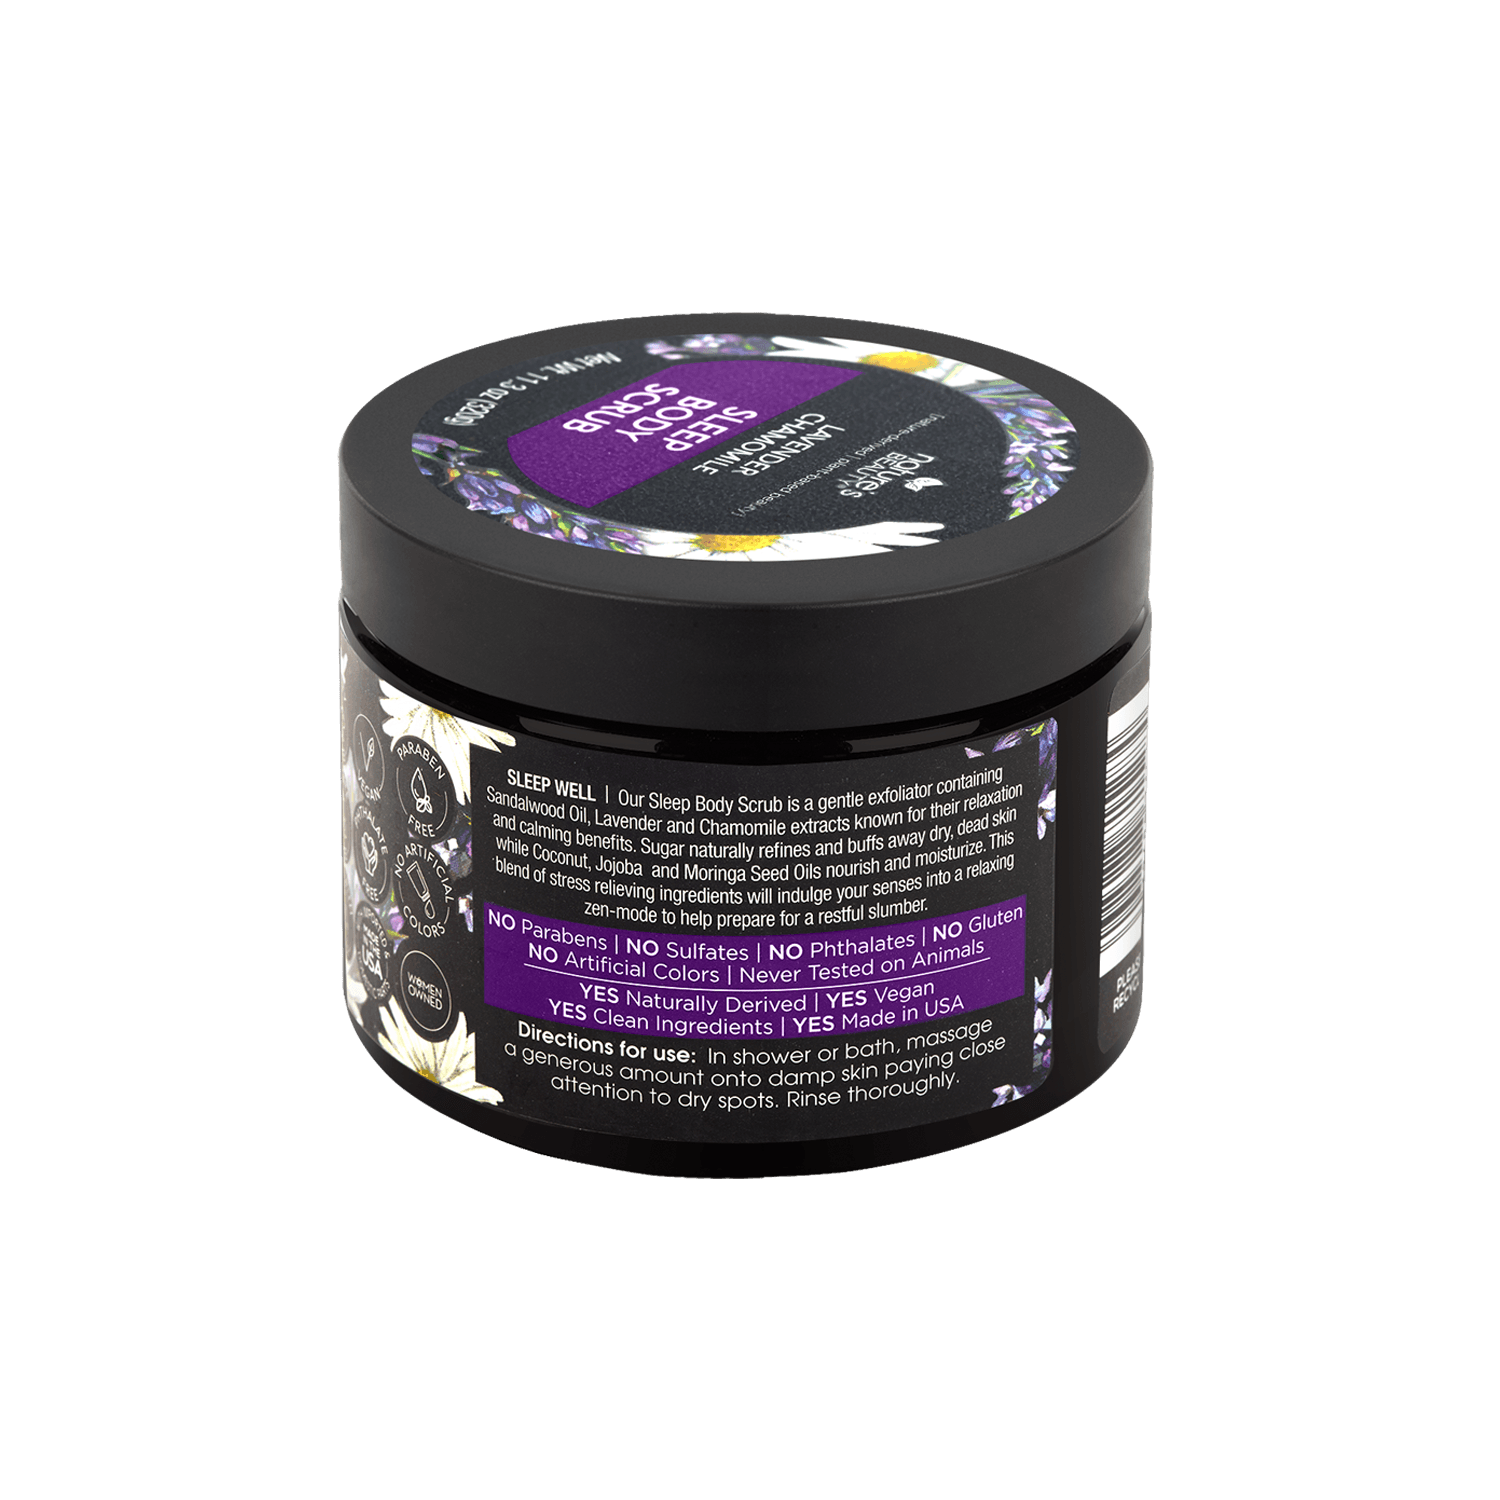 Lavender Chamomile Sleep Solution Set Nature's Beauty Body Care 